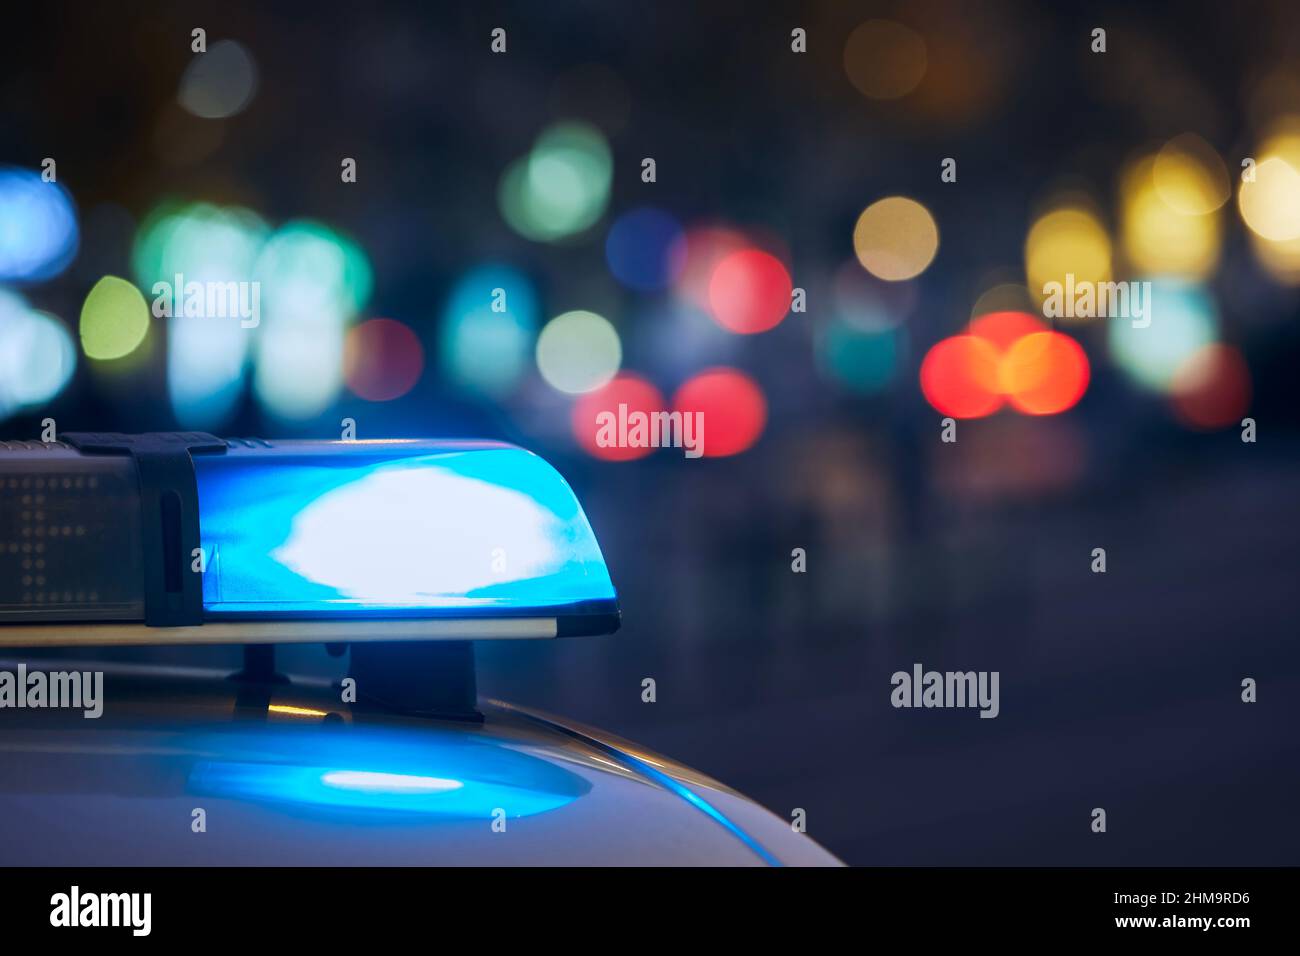 Blue flasher light of siren of police car at night city street. Themes crime, emergency and help. Stock Photo